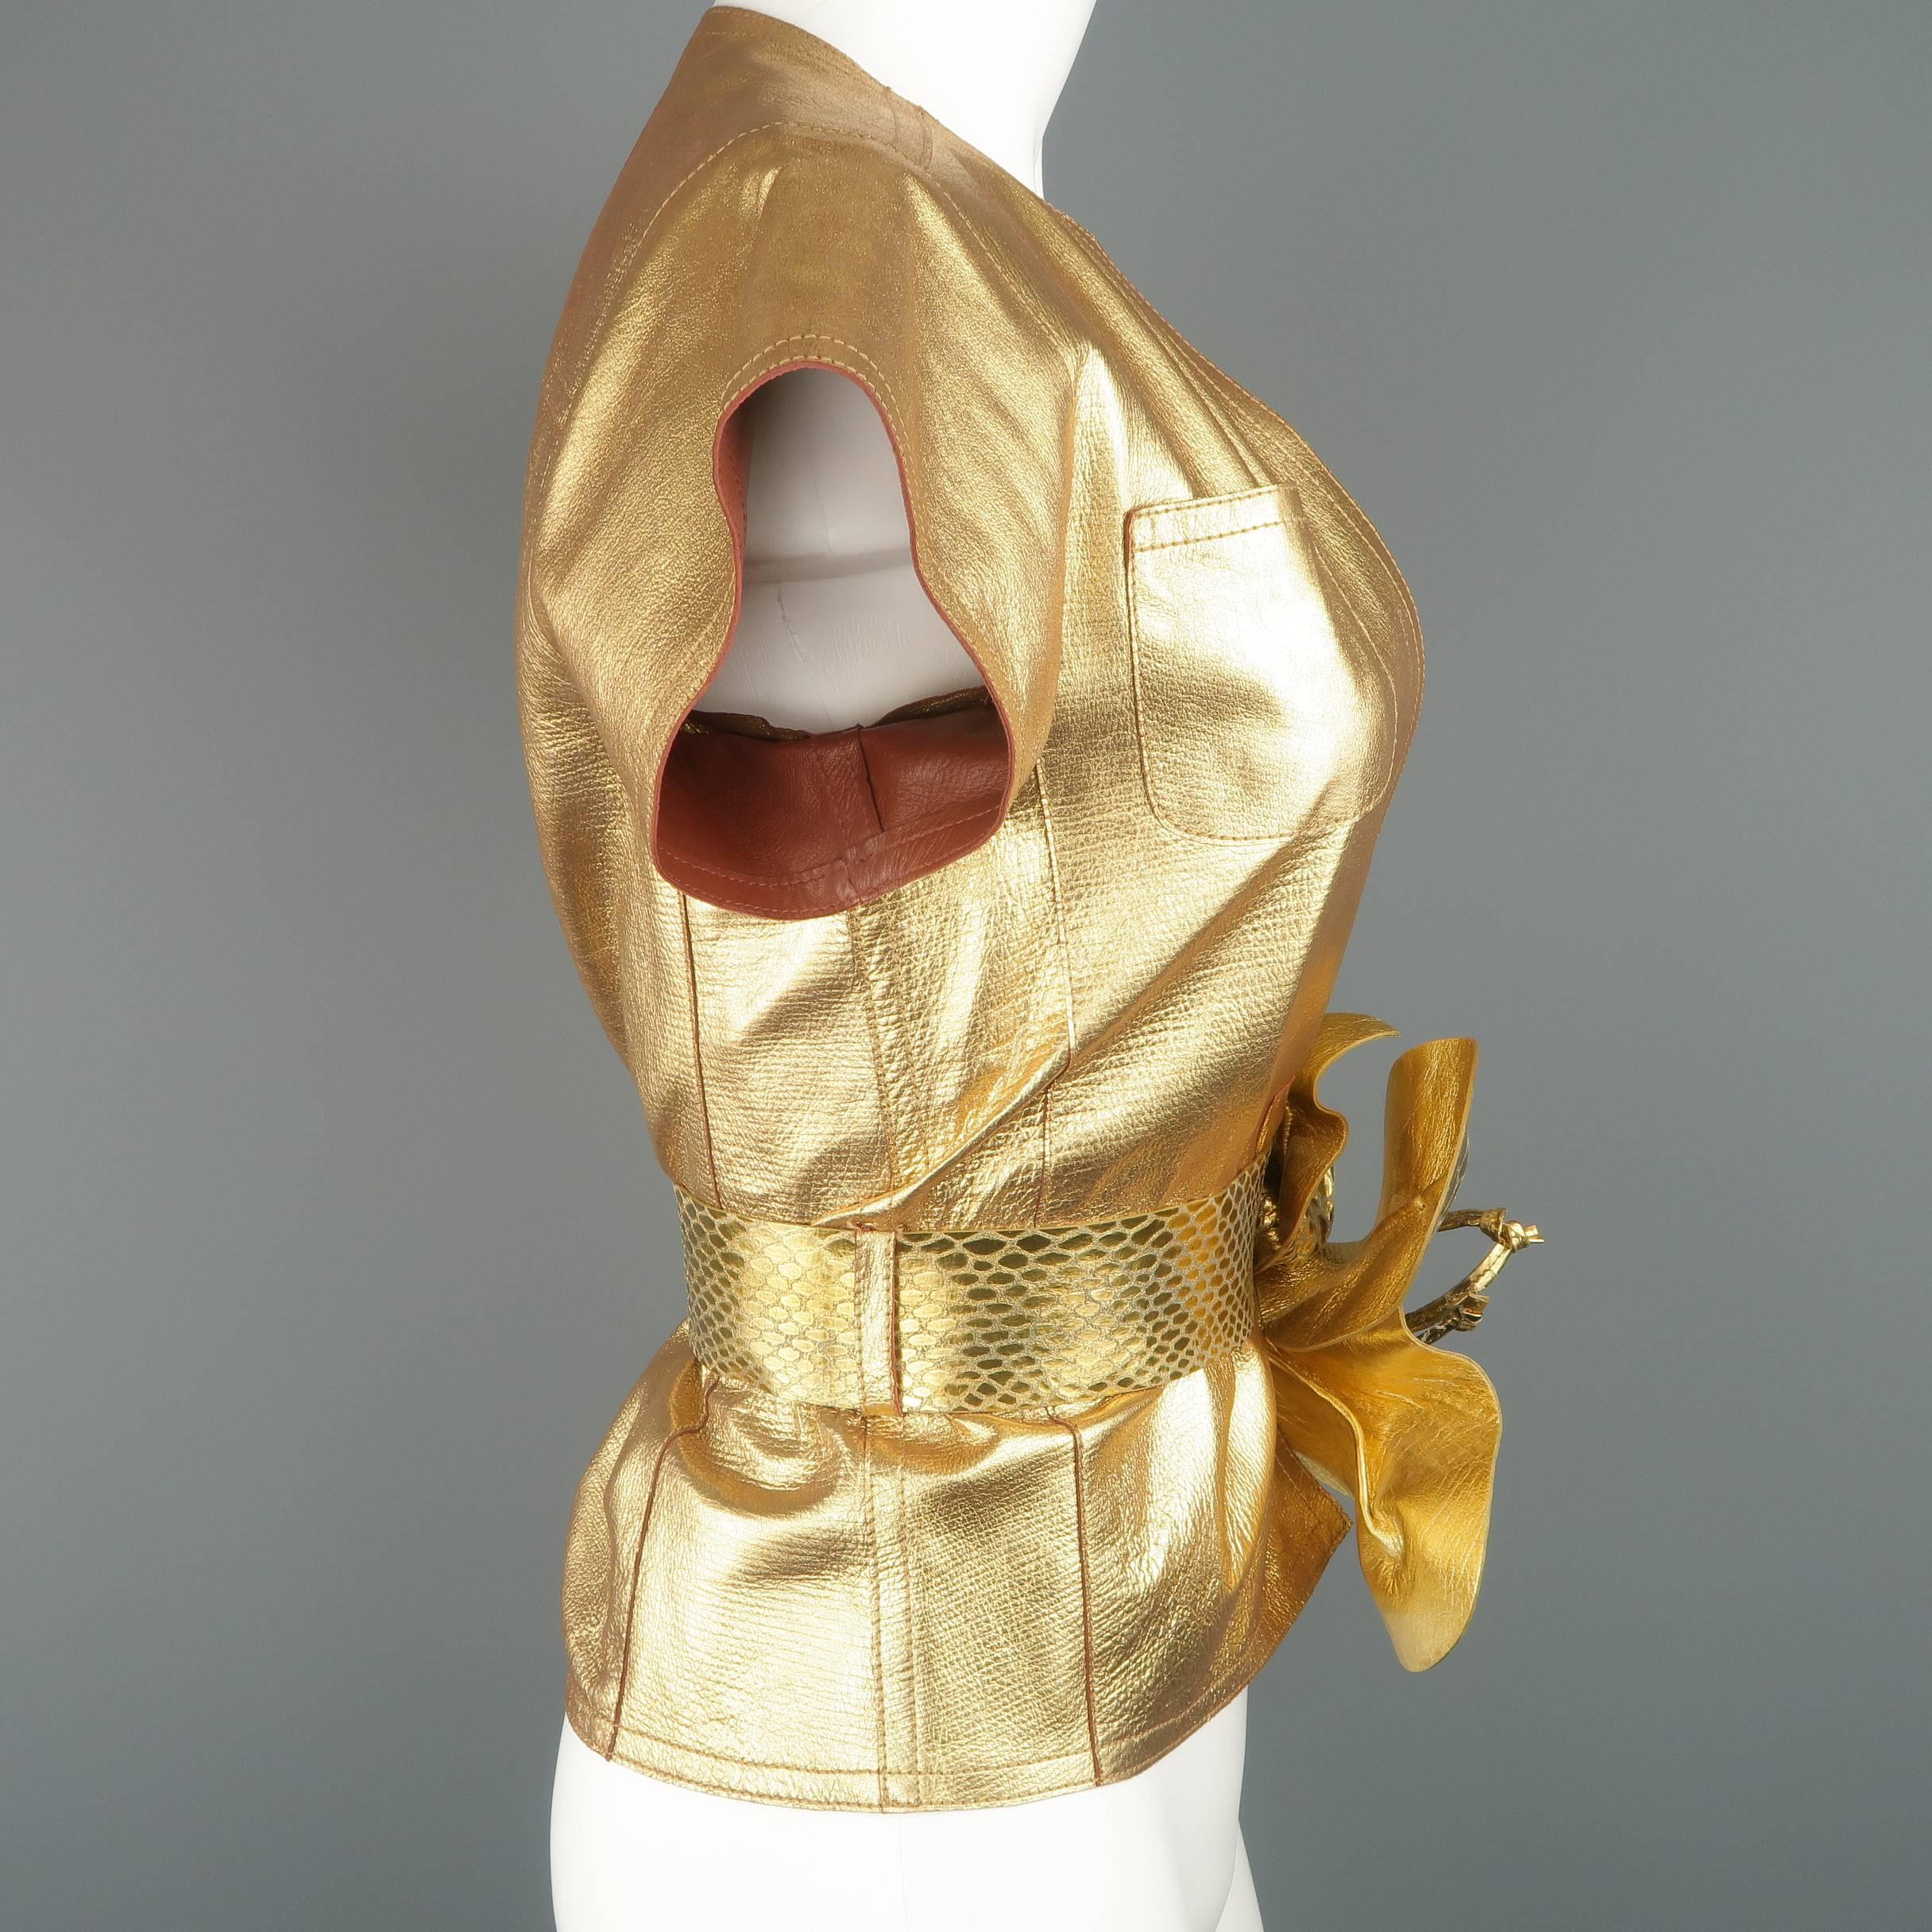 Women's Marc Jacobs Gold Leather Wrap Flower Belt Blouse Top, Spring 2011 Runway 